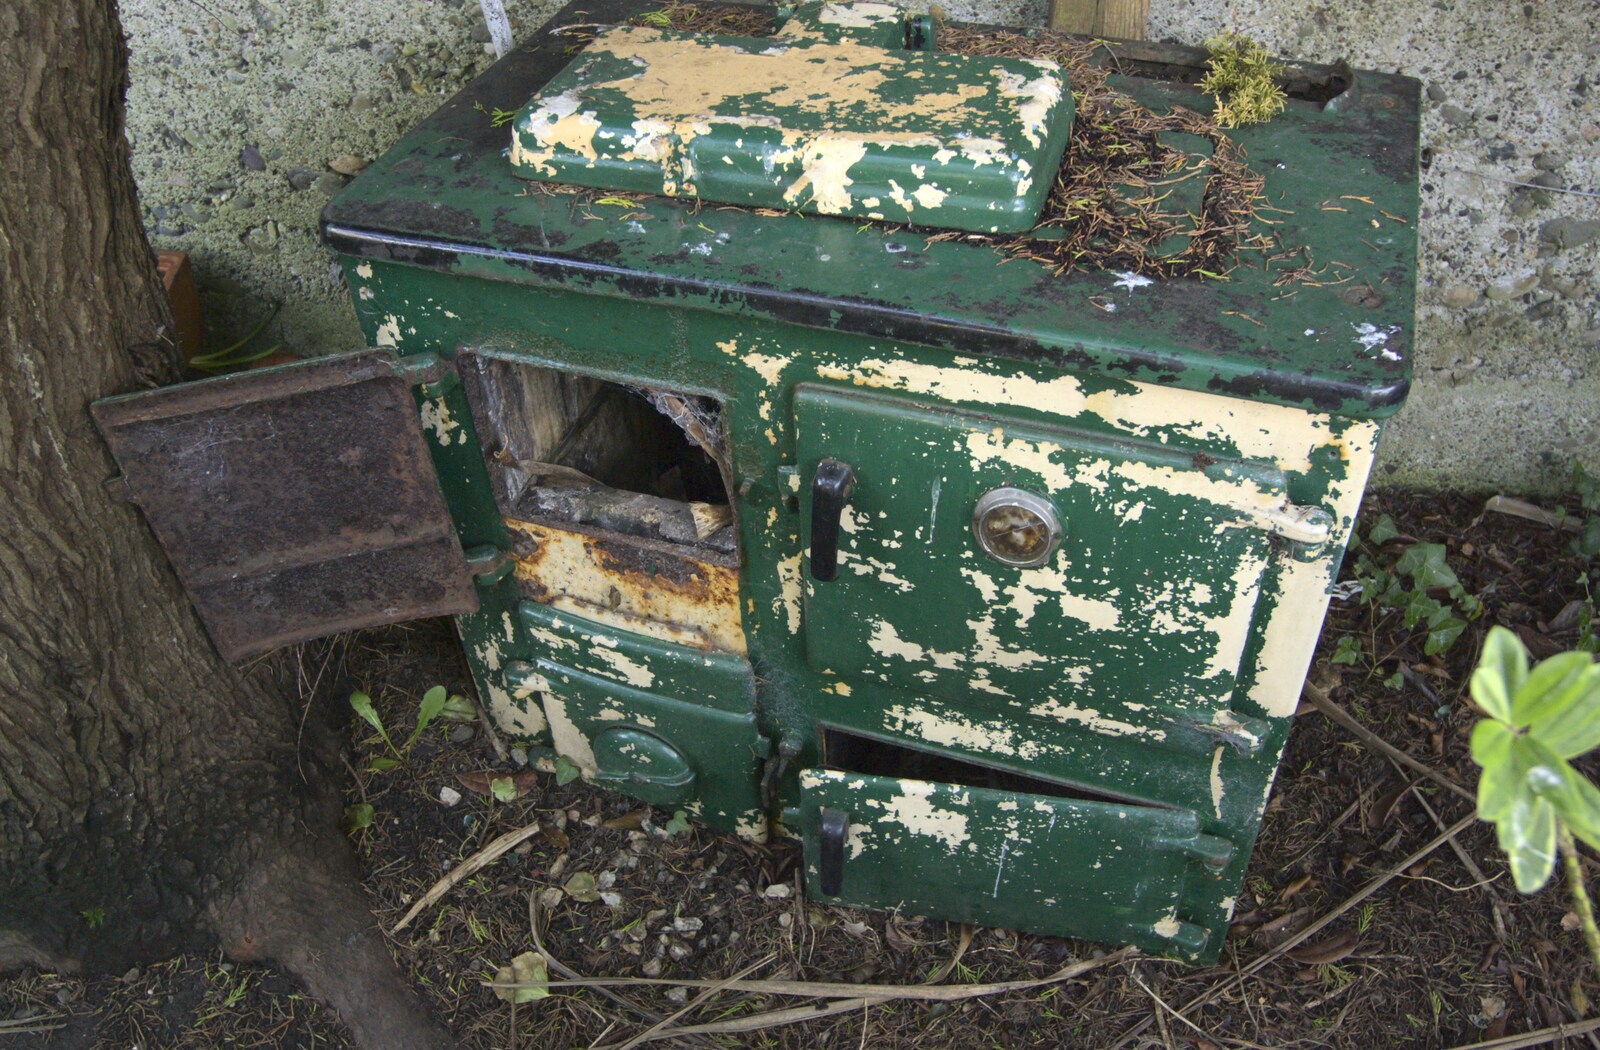 An abandoned Aga-like stove in the garden of the café from A Day in Greystones, County Dublin, Ireland - 28th February 2010